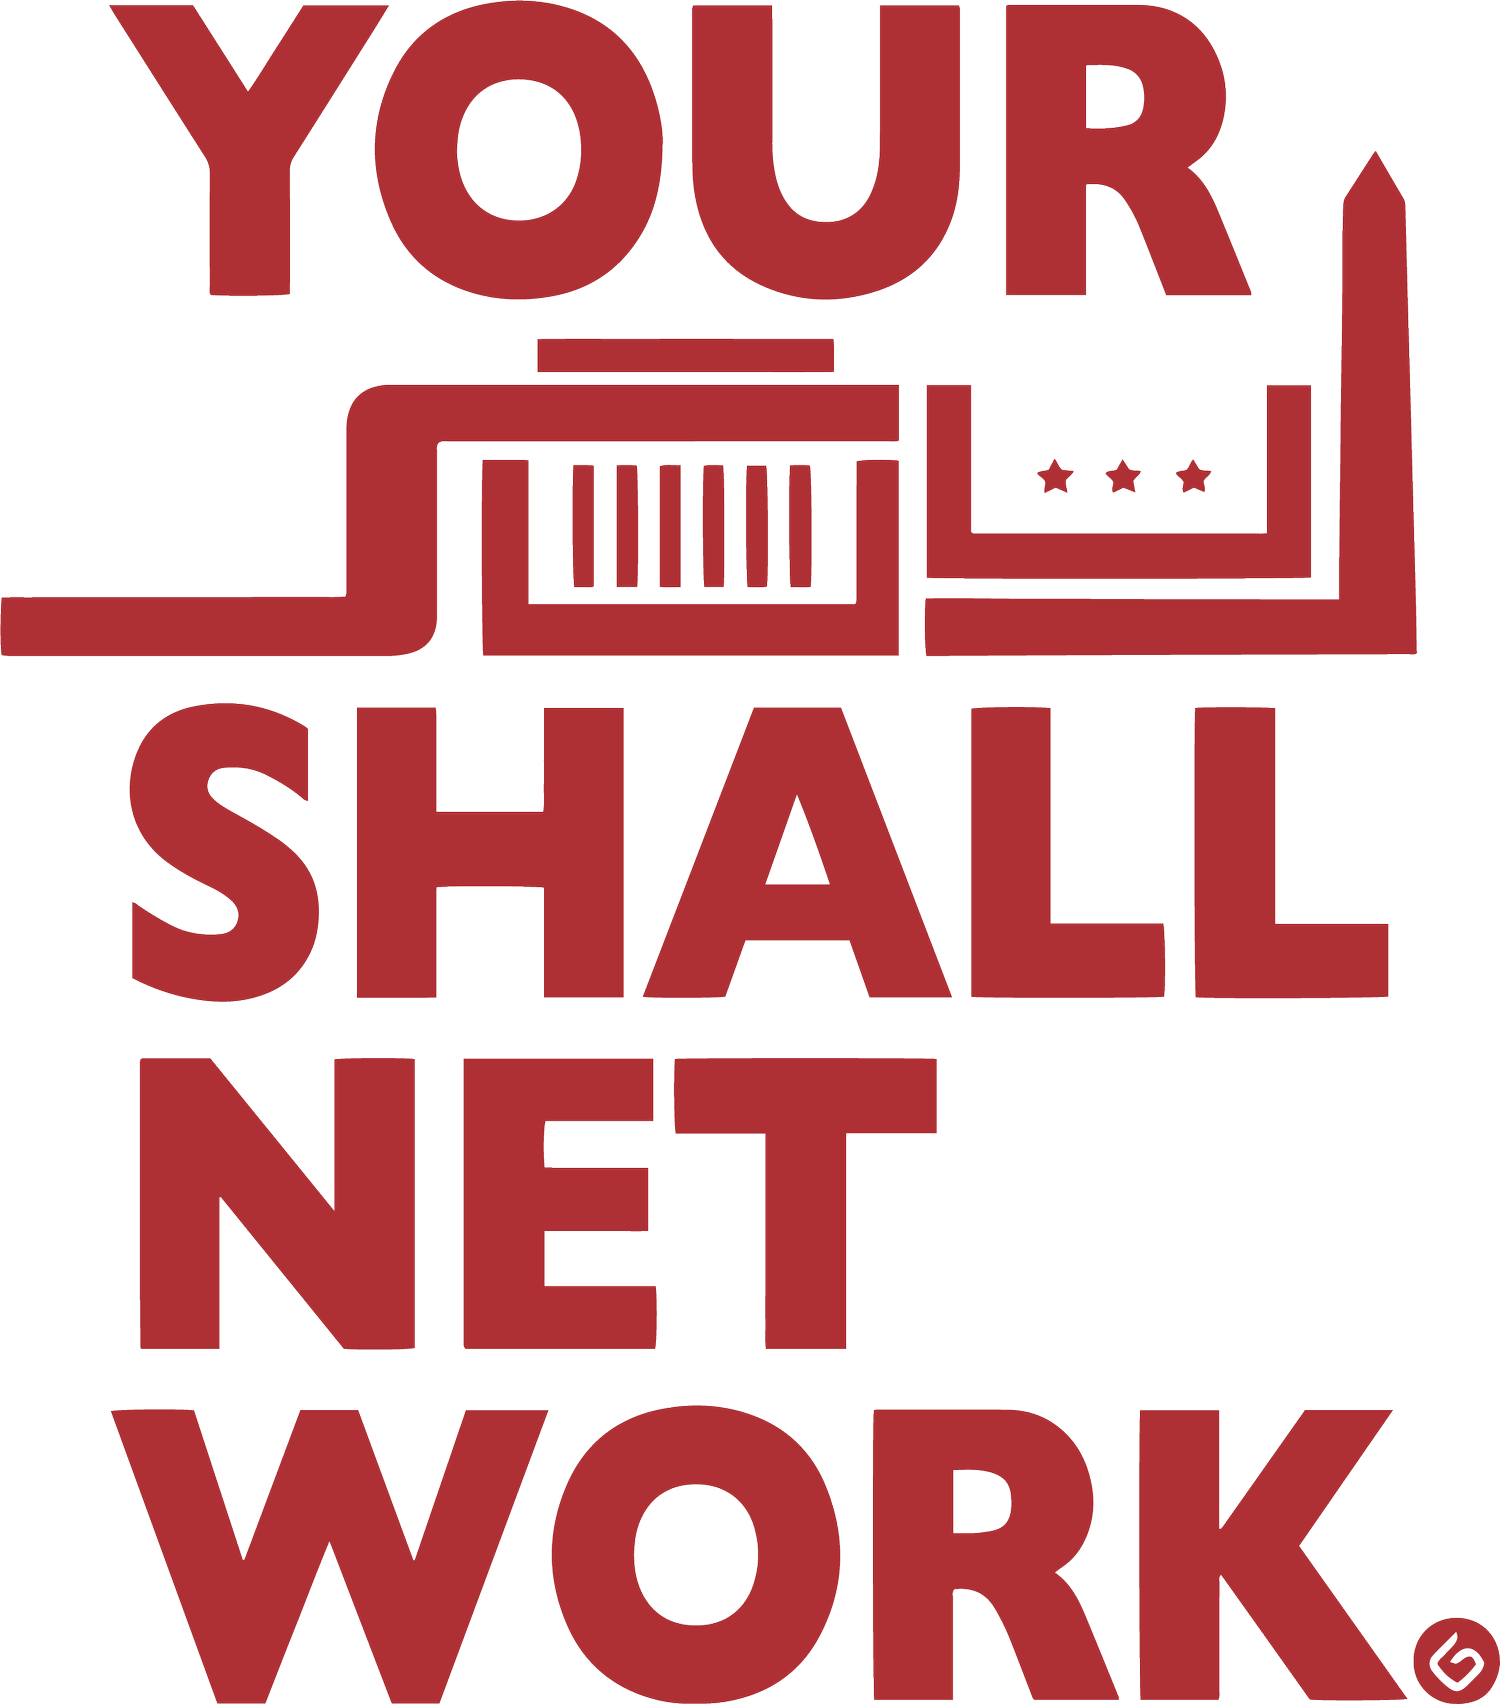 YOUR SOUL SHALL NET WORK.